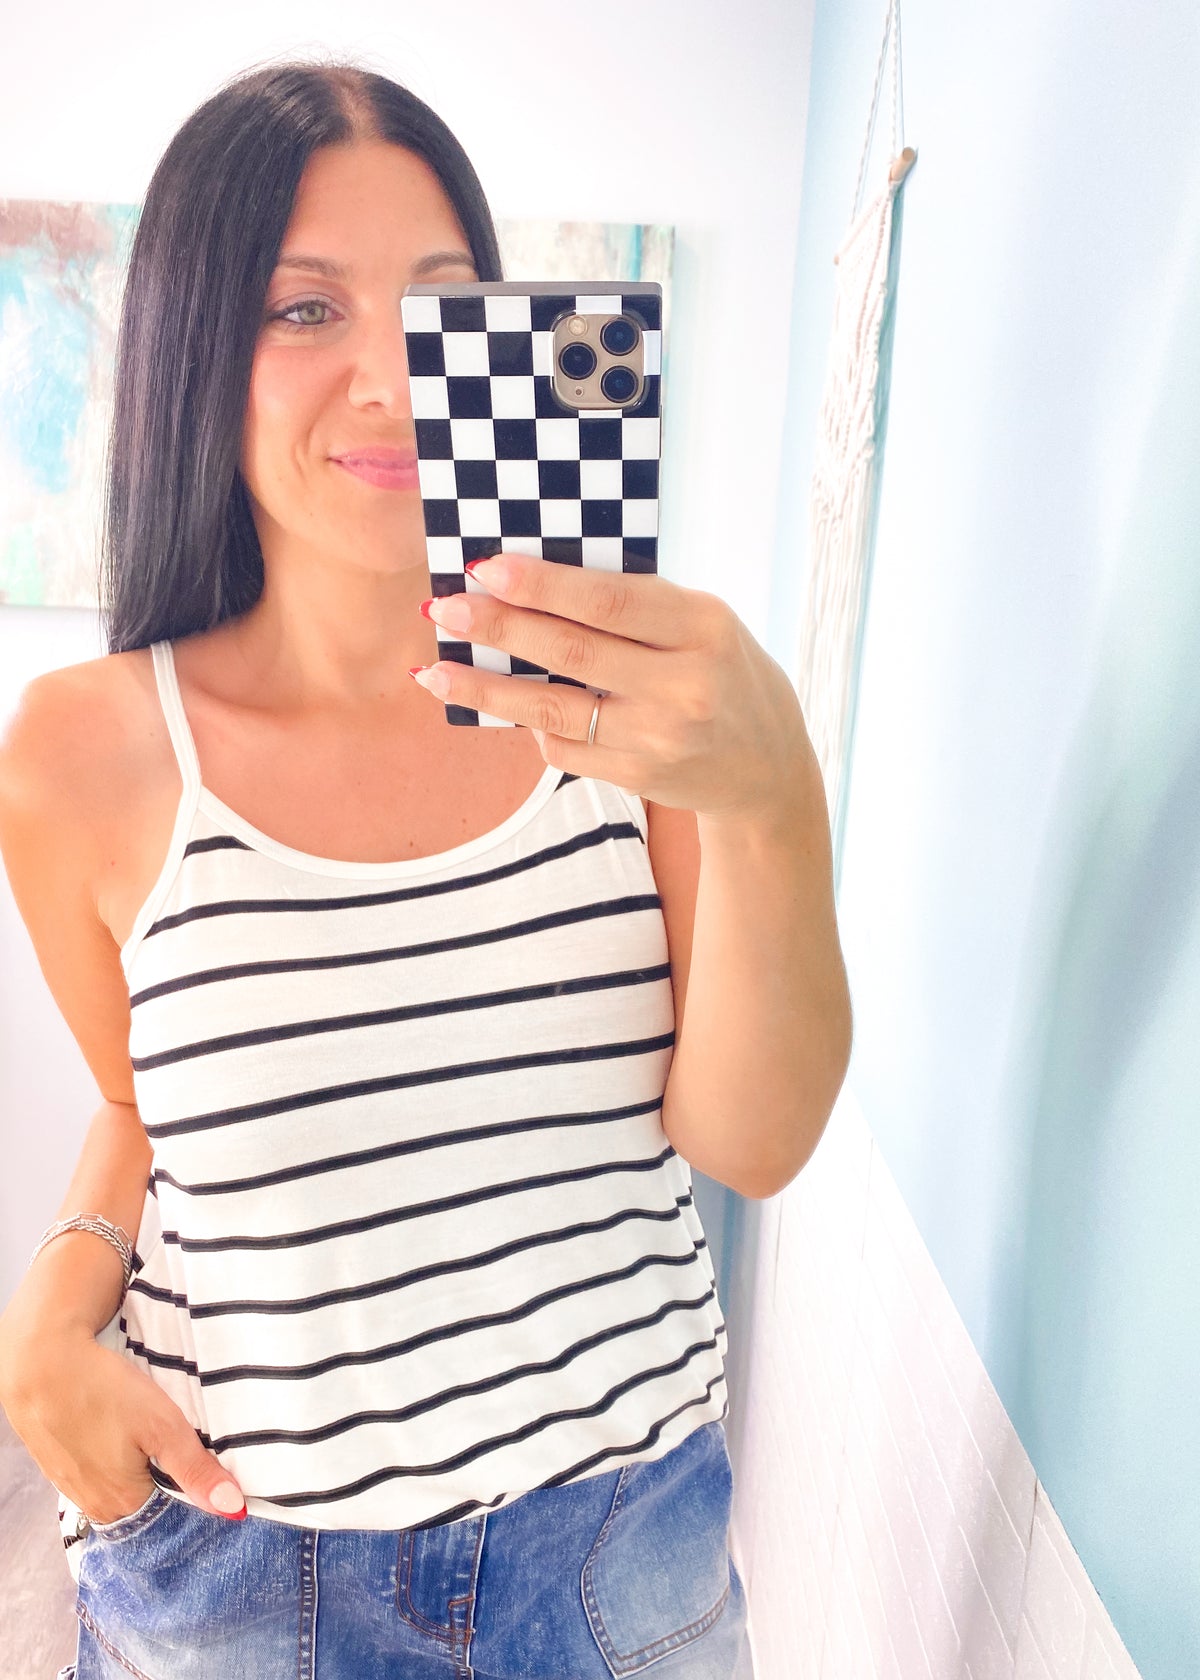 'Breezeway' Ivory & Black Stripe Reversible Cami Tank-Airy and breezy, this adorable tank in classic ivory &amp; black stripe colors is perfect to throw on and go all Summer. Wear the v-neck or scoop neck front for different looks. Tuck in or wear untucked. Great to lay or wear alone.-Cali Moon Boutique, Plainville Connecticut